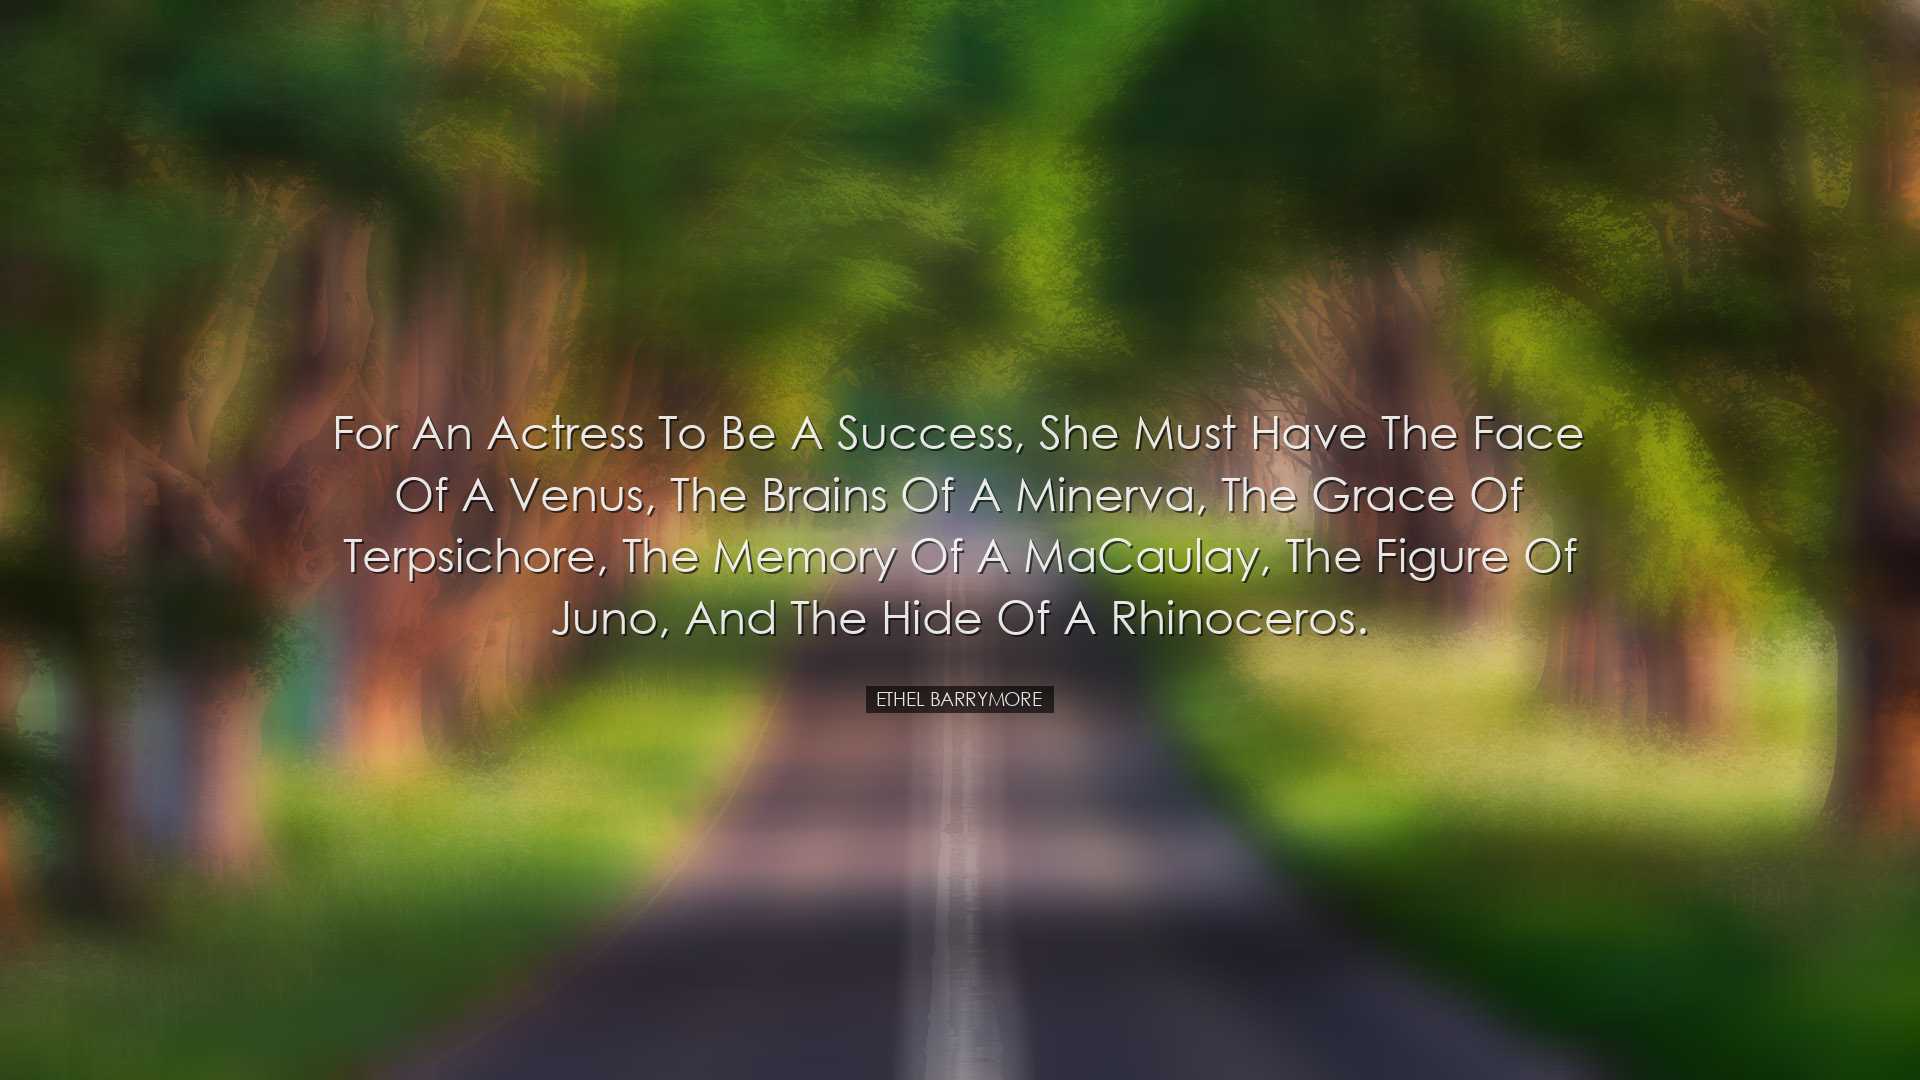 For an actress to be a success, she must have the face of a Venus,